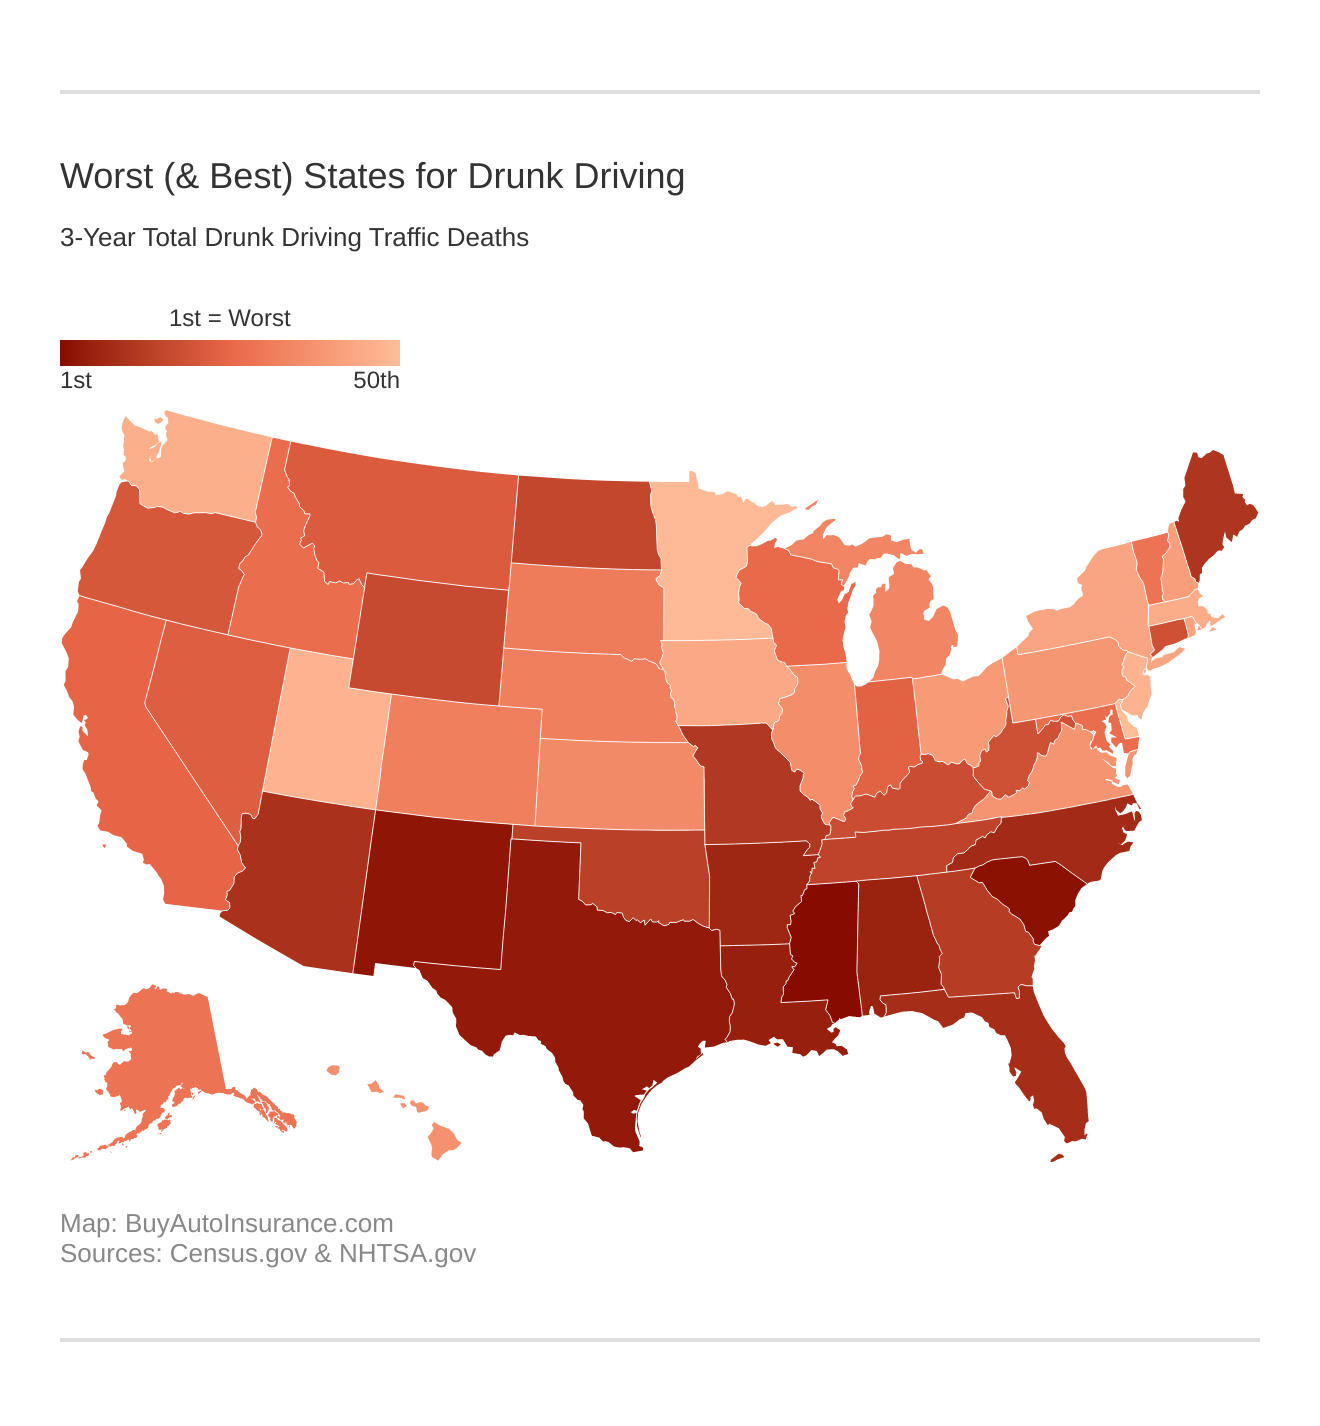 Worst (& Best) States for Drunk Driving